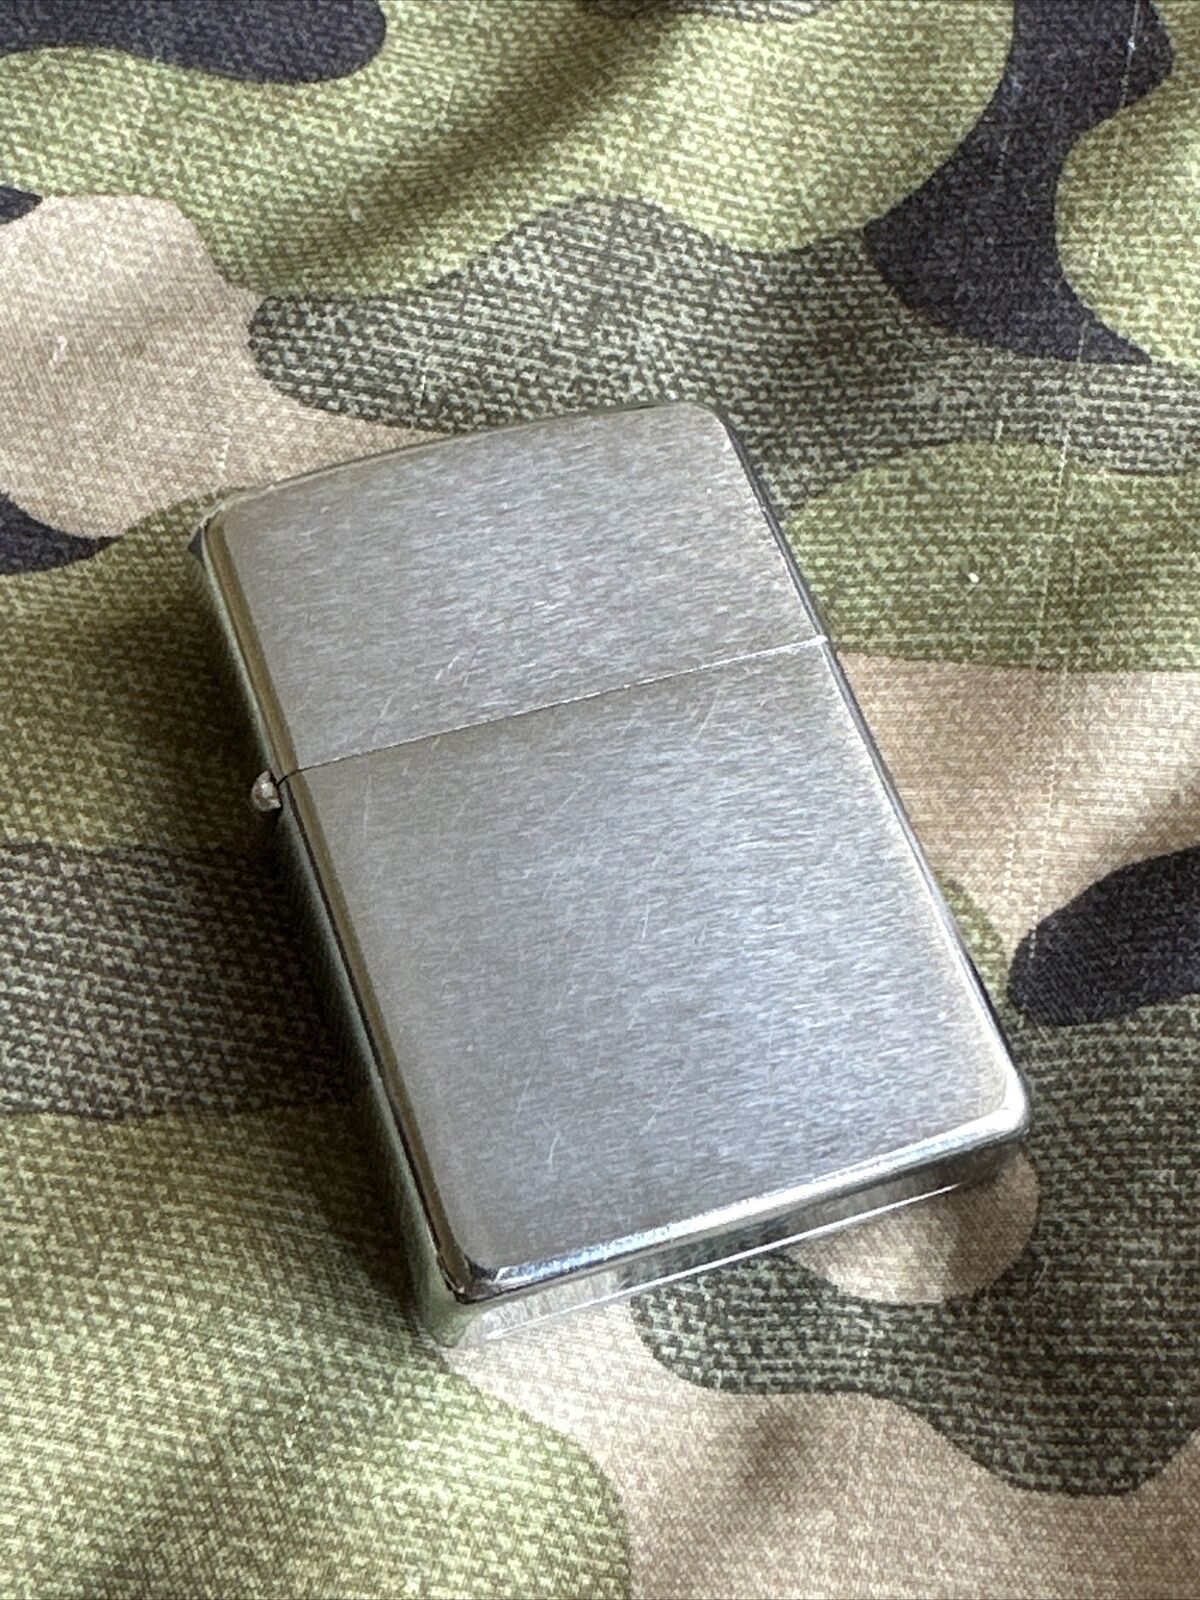 1970 Classic Vintage Zippo Lighter - Brushed Chrome Finish - Solid Fuel Cell